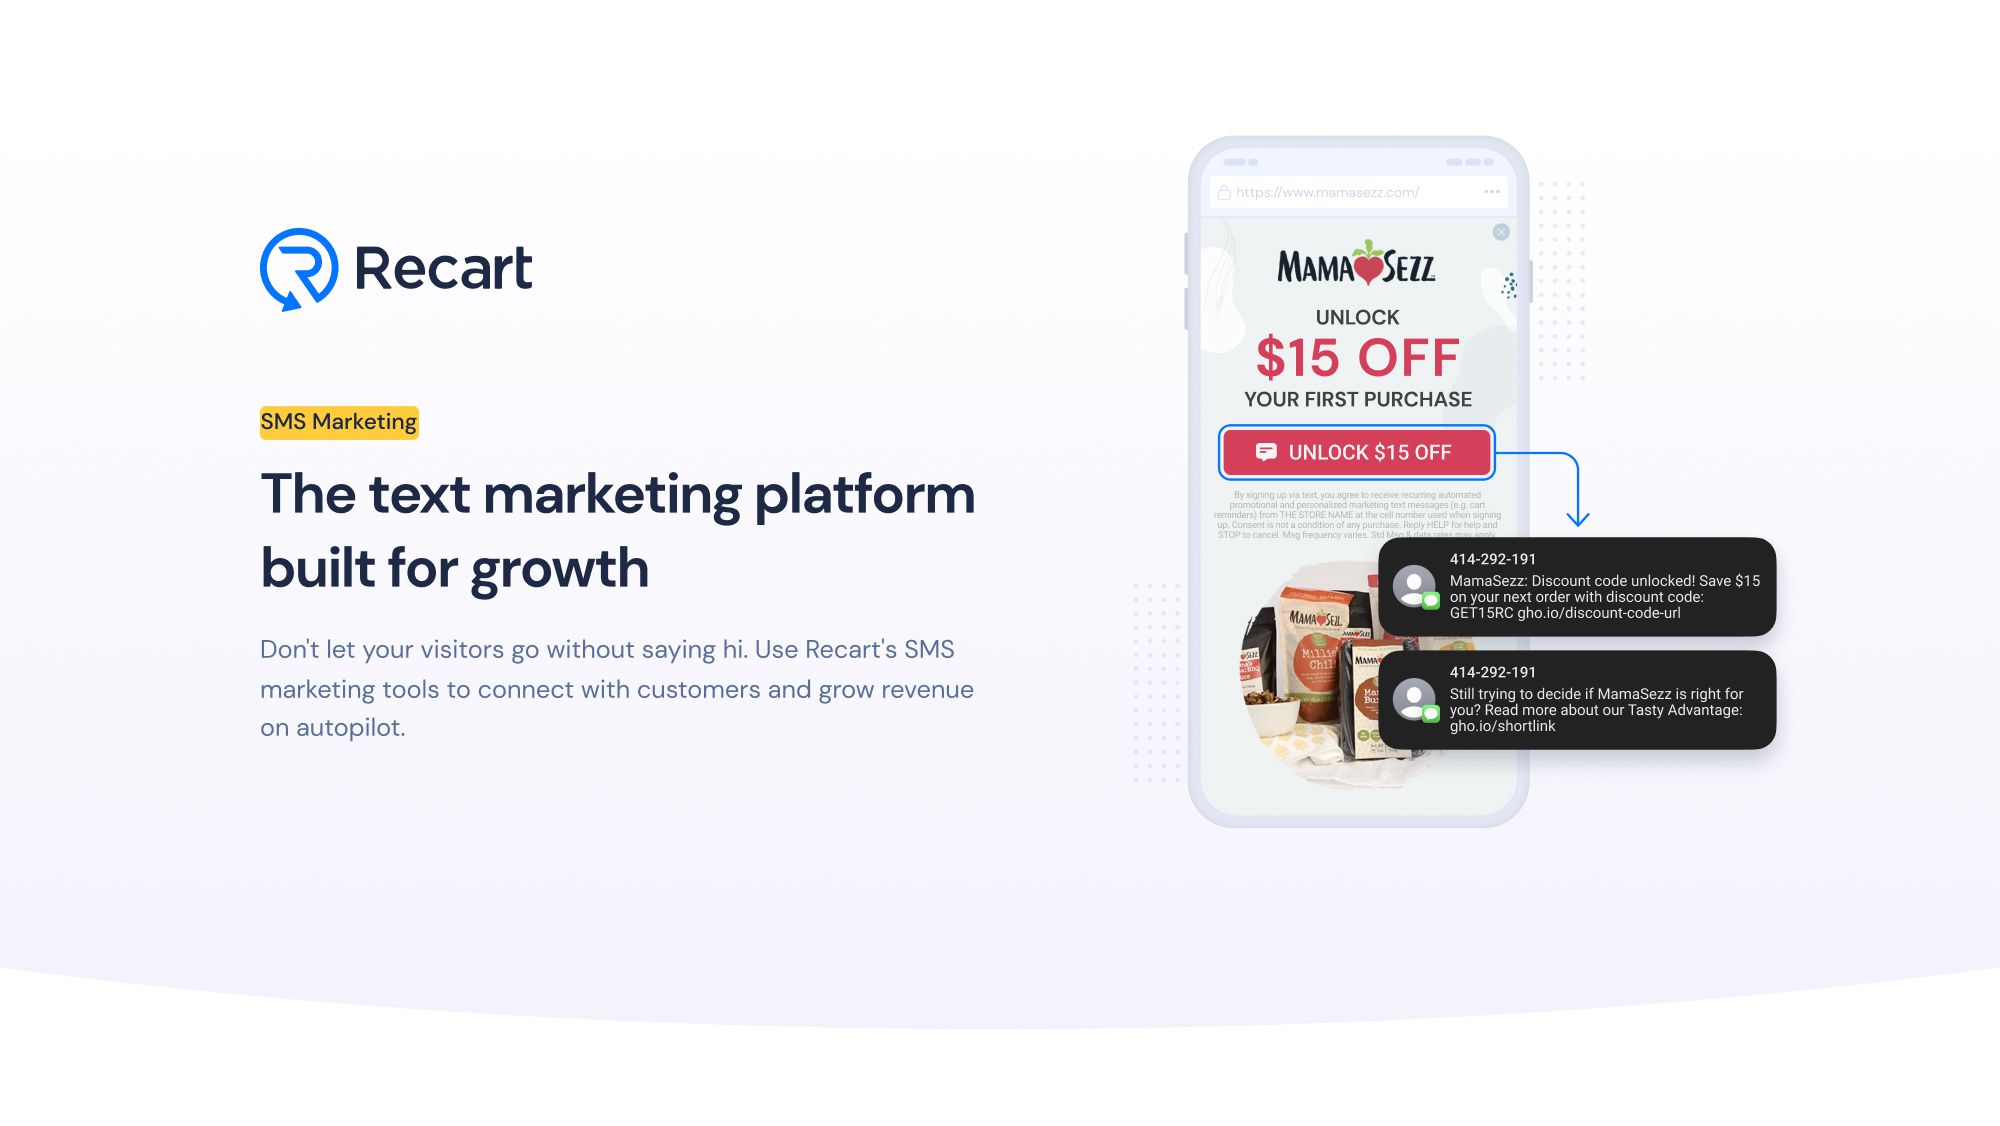 "SMS Marketing, the text marketing platform built for growth. Don't let your visitors go without saying hi. Use Recart's SMS marketing tools to connect with customers and grow revenue on autopilot."